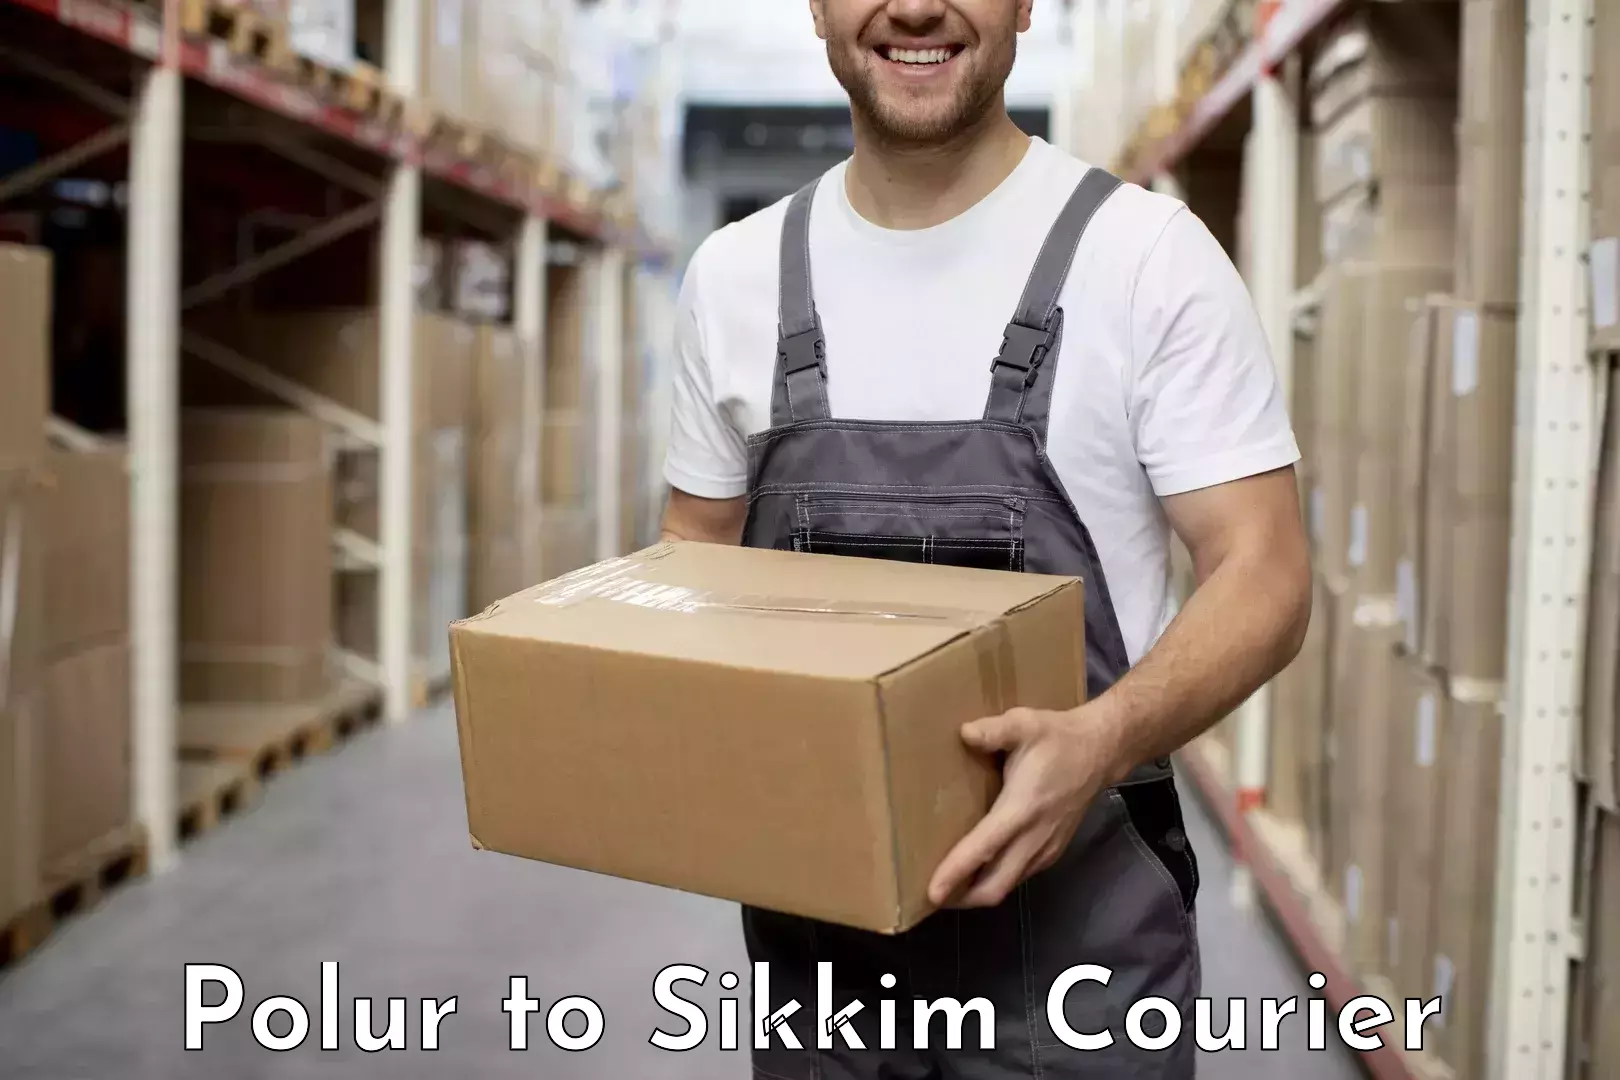 Subscription-based courier Polur to Sikkim